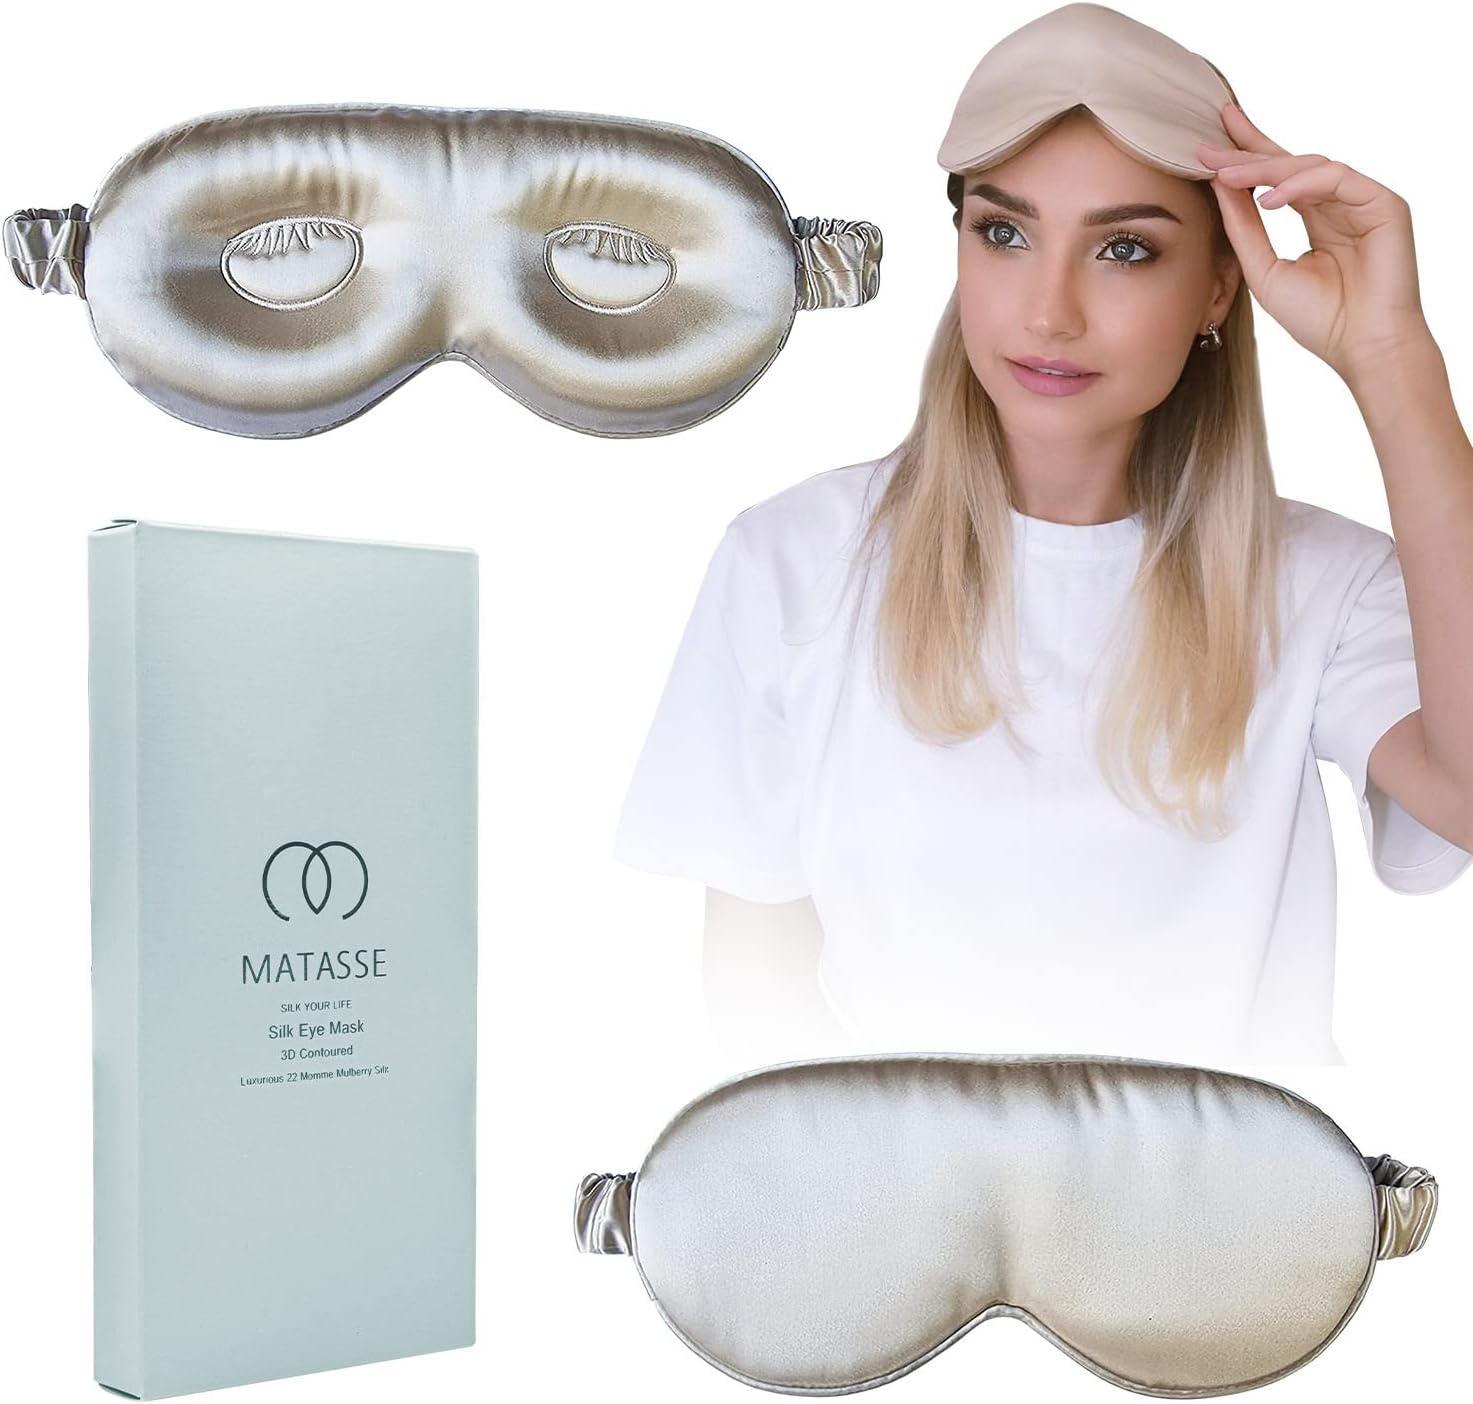 MATASSE 22 Momme Mulberry Silk Eye Sleeping Mask with Adjustable Strap- 3D Contoured Eye Mask for Sleeping, Eye Cover Sleep Mask w/Silk Covered Strap for Women, Men, Genuine Mulberry Silk, Champagne